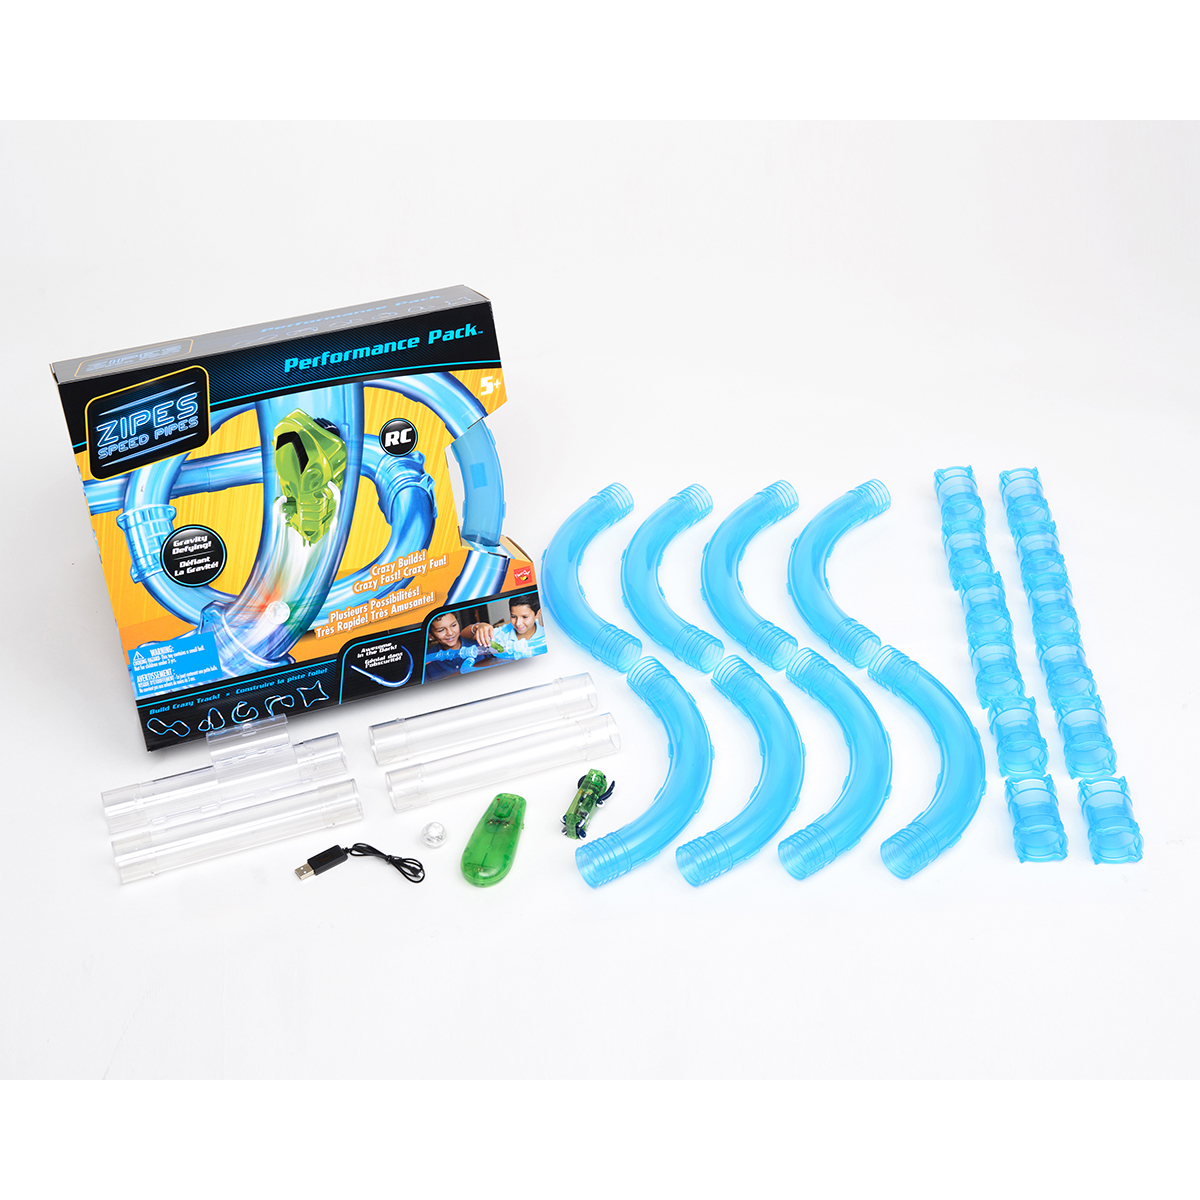 Neat Oh Zipes Speed Pipe Performance Pack Starter Set